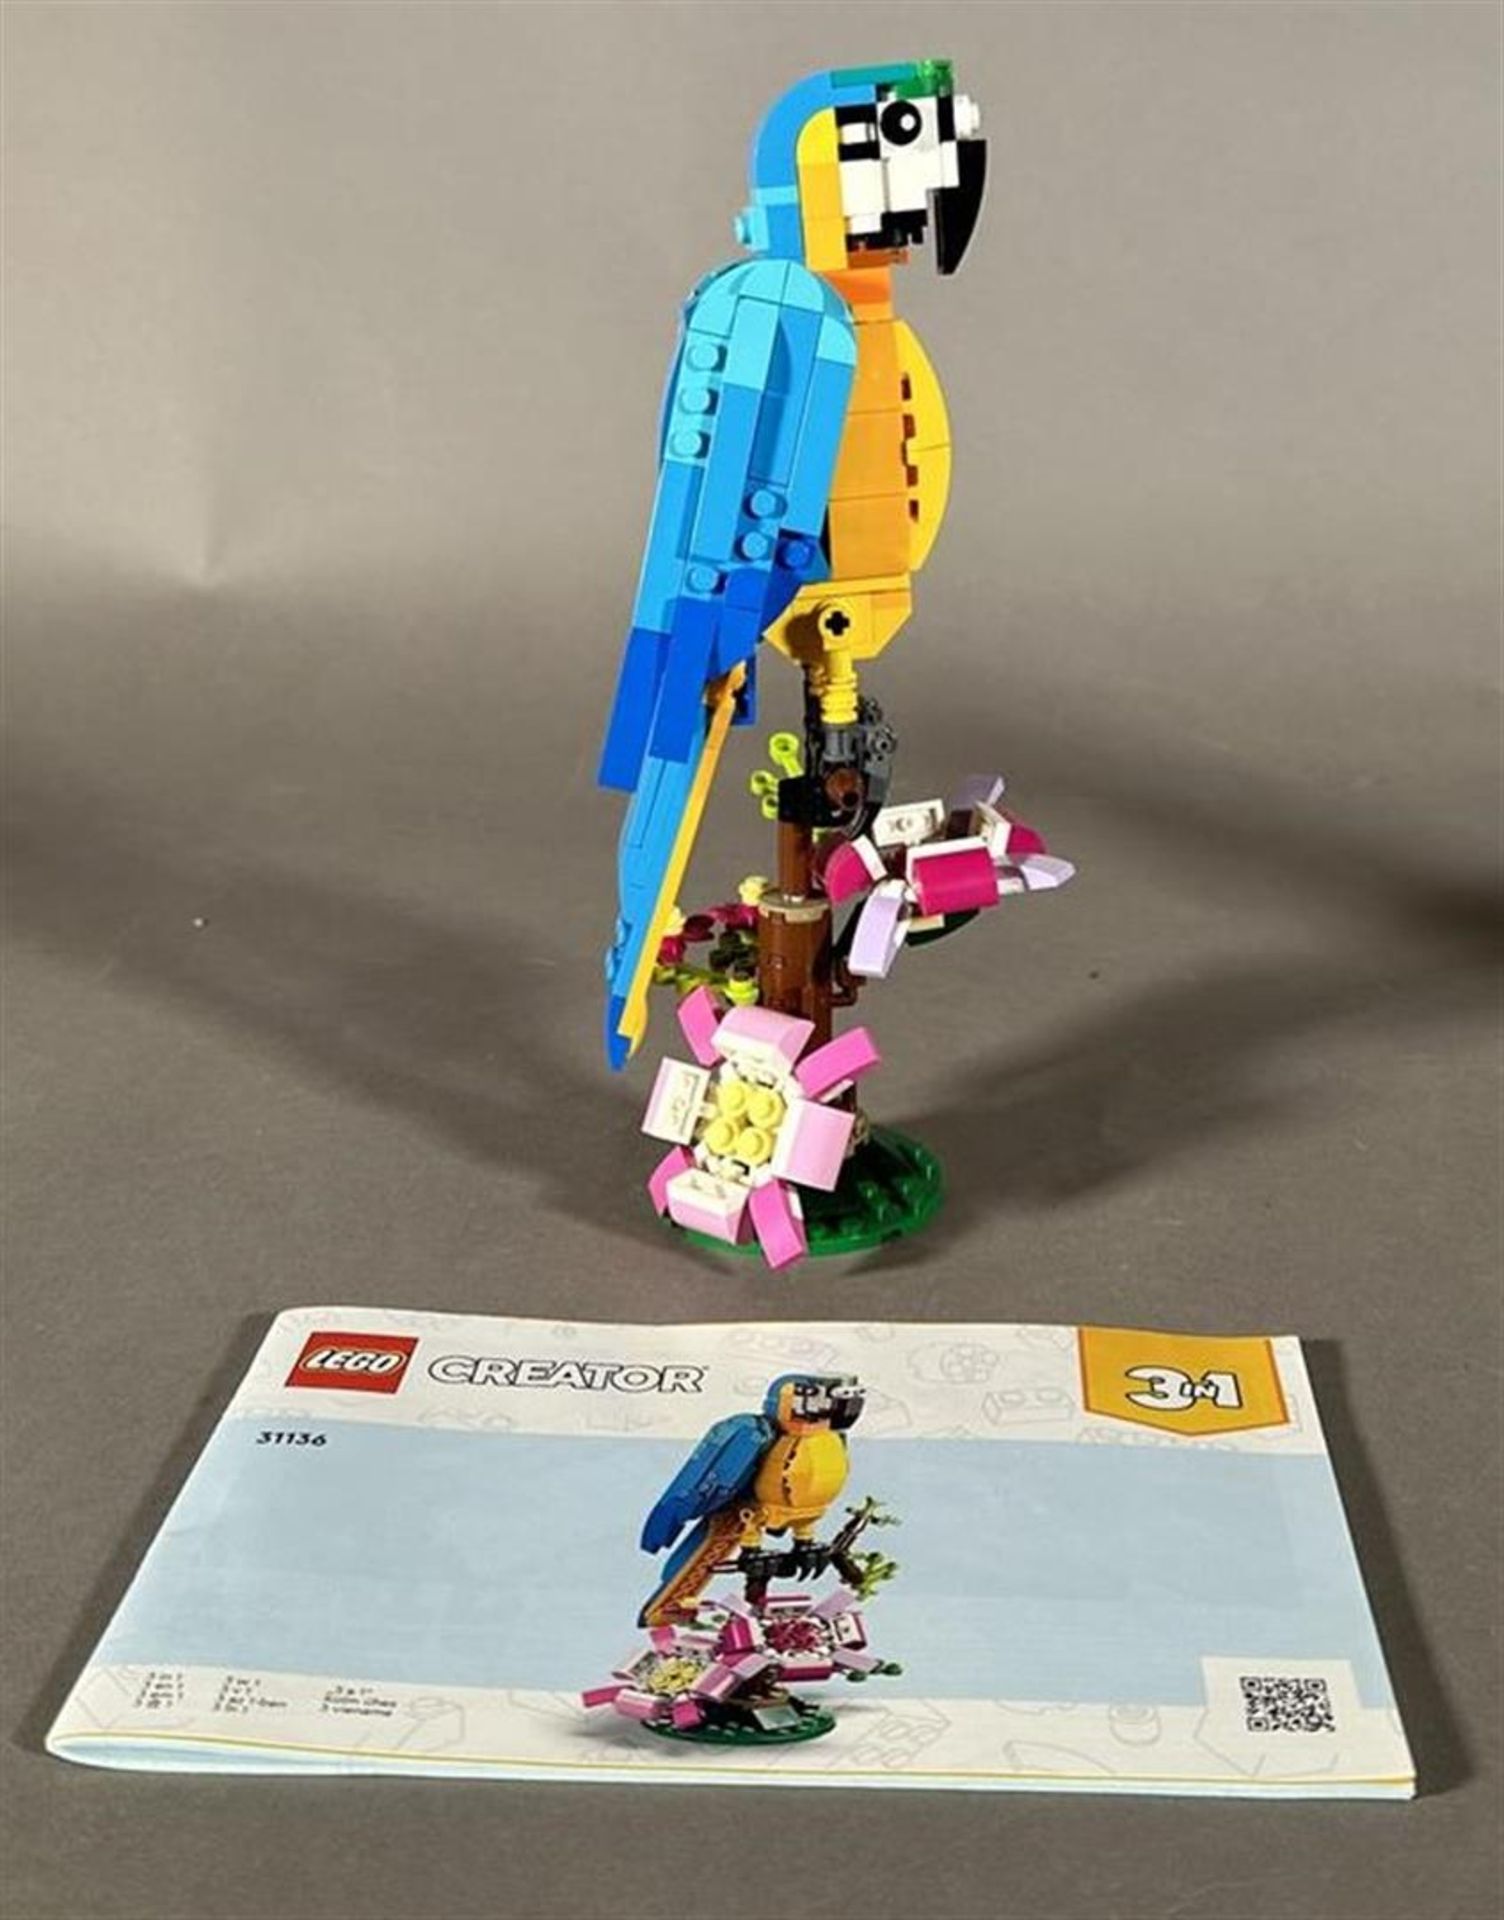 Lego creator 'blue' exotic parrot 31136; Lego creator 'pink' exotic parrot 6442319. (2x) - Image 4 of 4